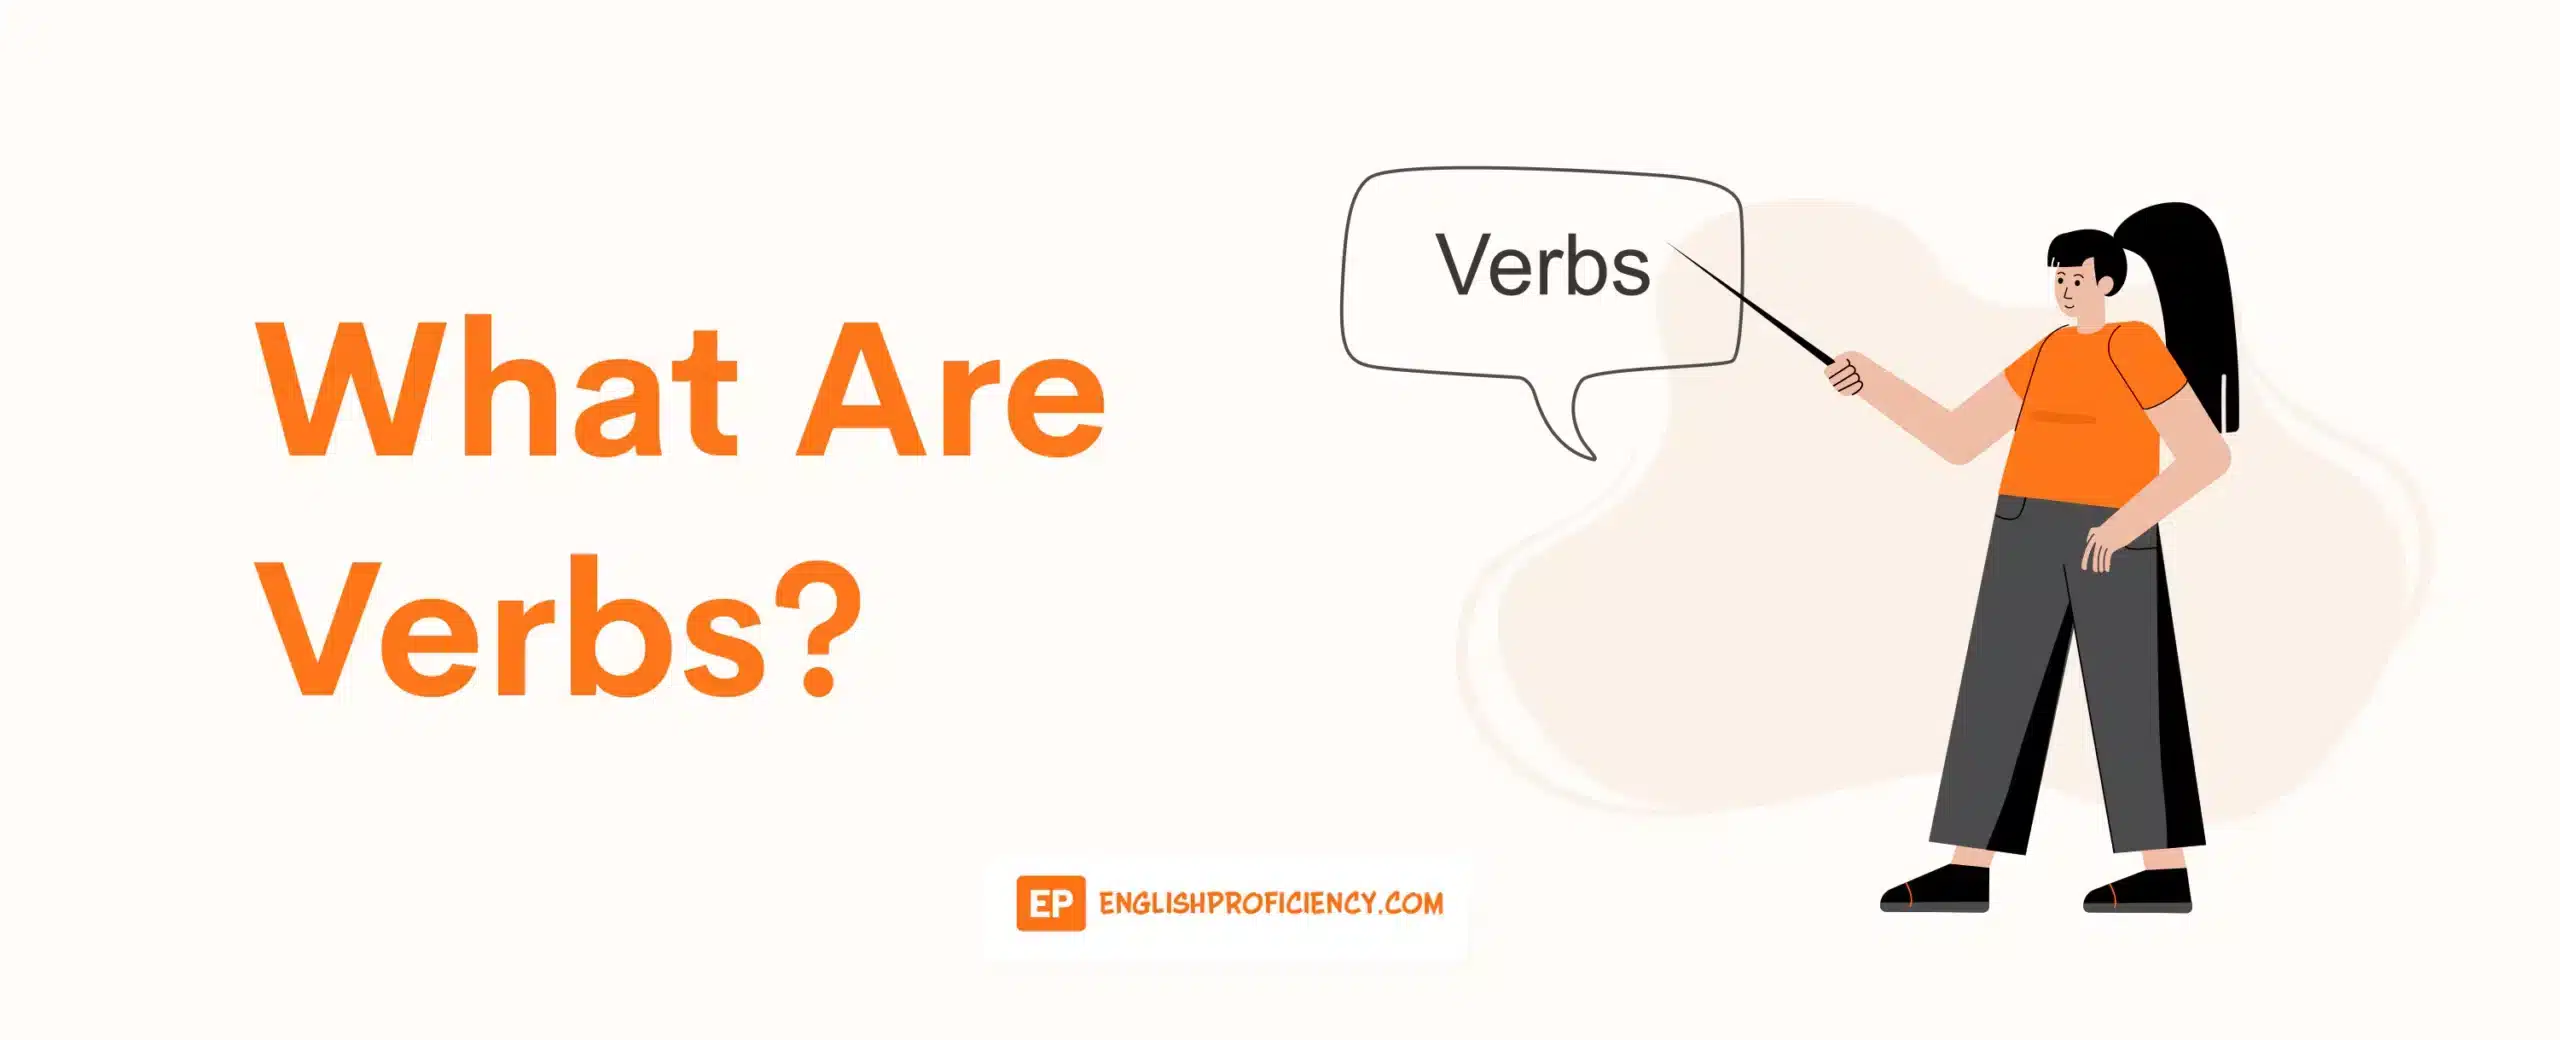 What Are Verbs